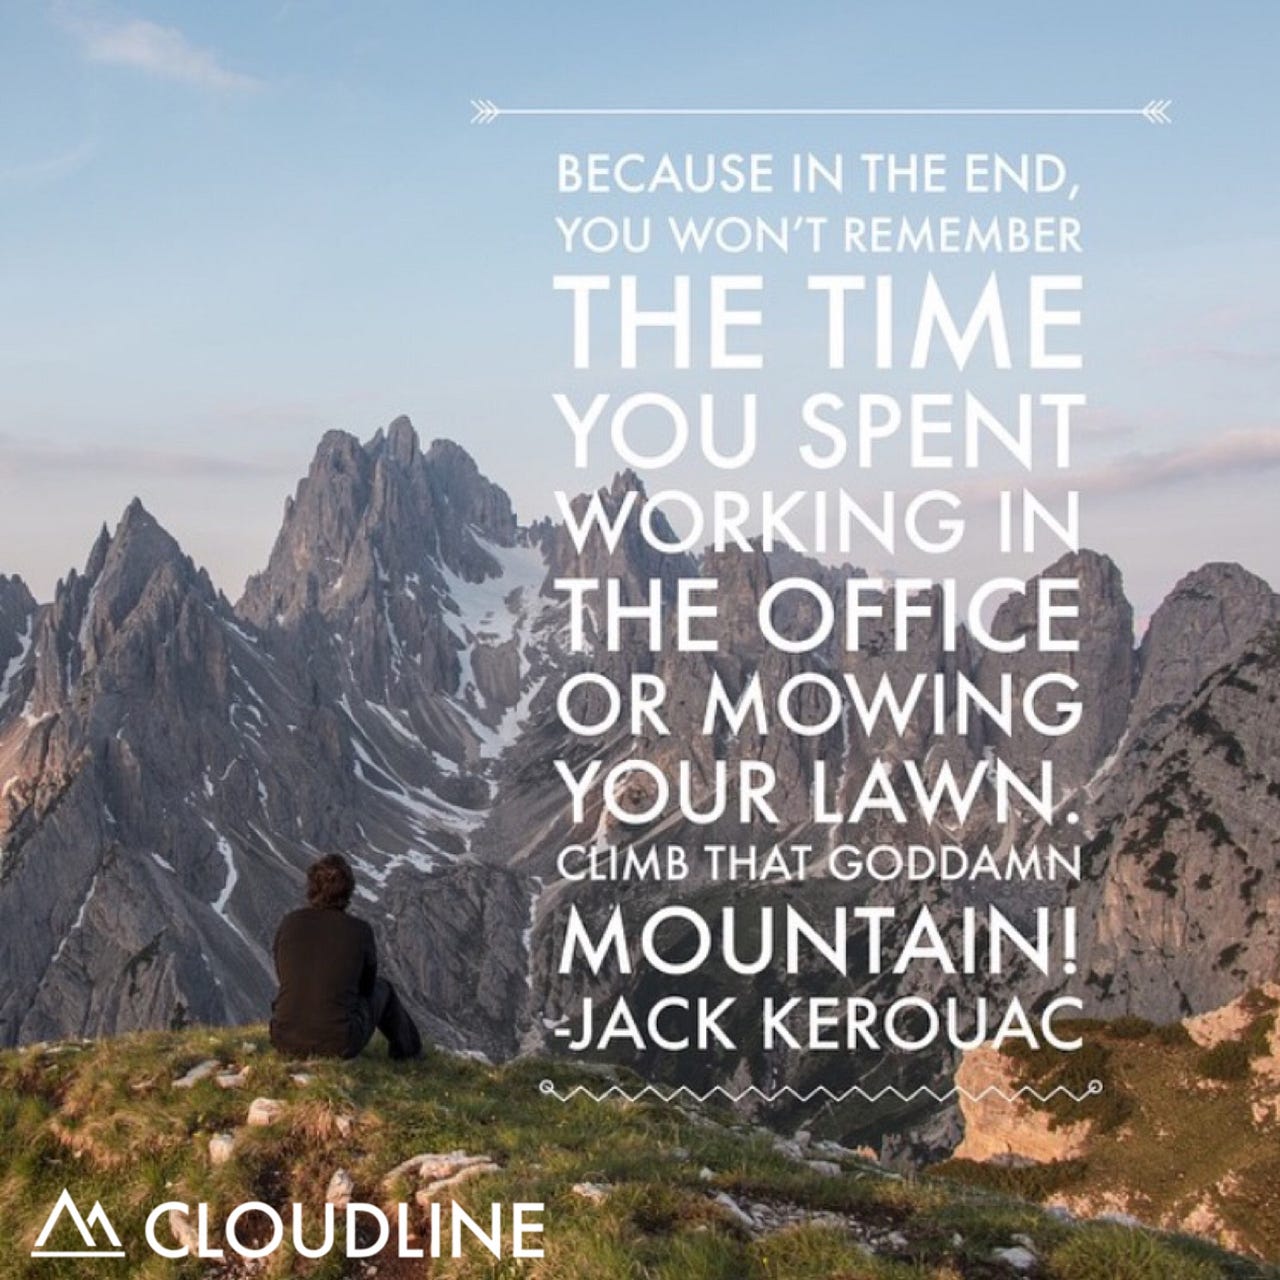 A Few Famous Quotes to Inspire Your Next Adventure | by CloudLine | The